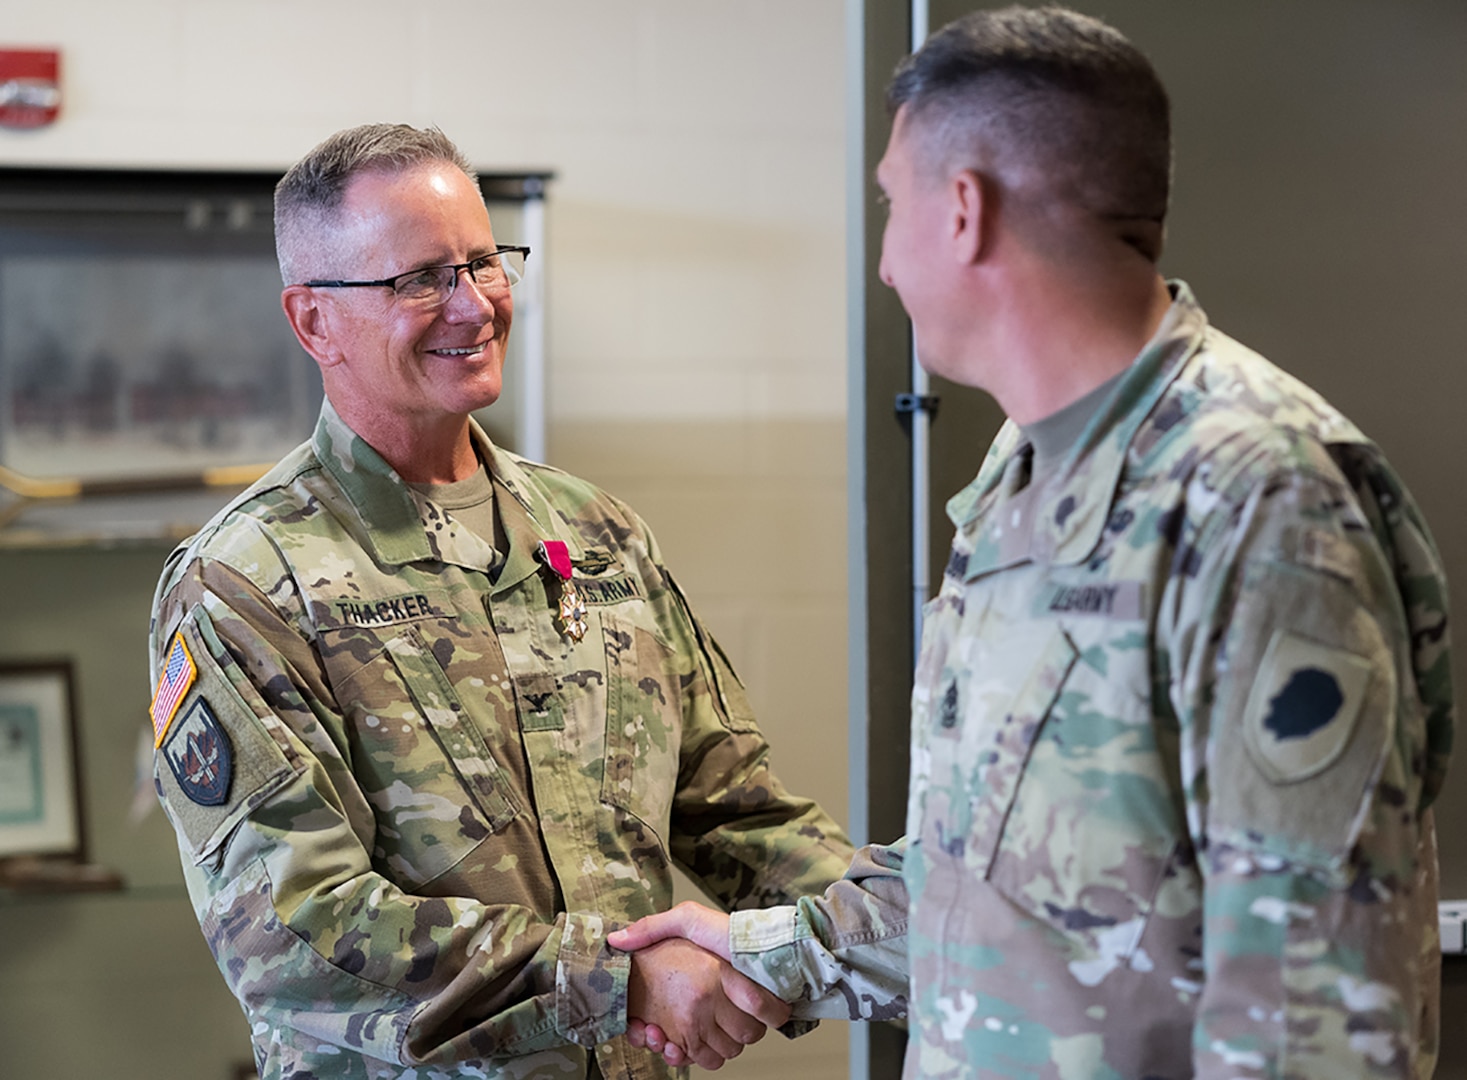 Friends congratulate Col. Rodney Thacker following his retirement ceremony, Aug. 23 at the Illinois Military Academy, Camp Lincoln, Springfield, Illinois.